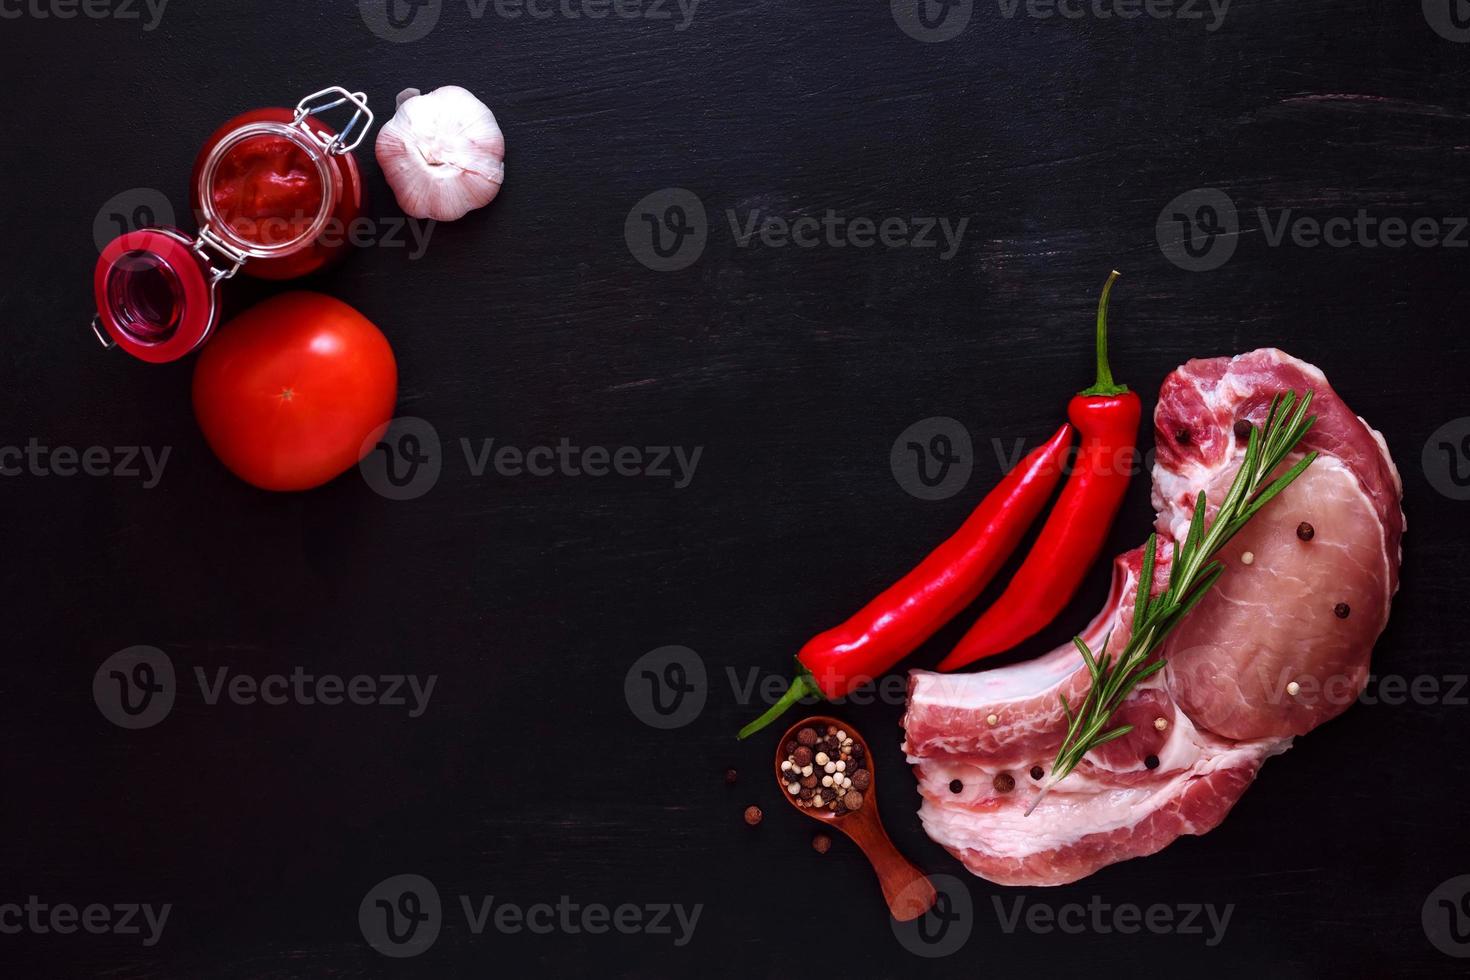 Pork entrecote raw meat with rosemary, pepper and red sauce photo